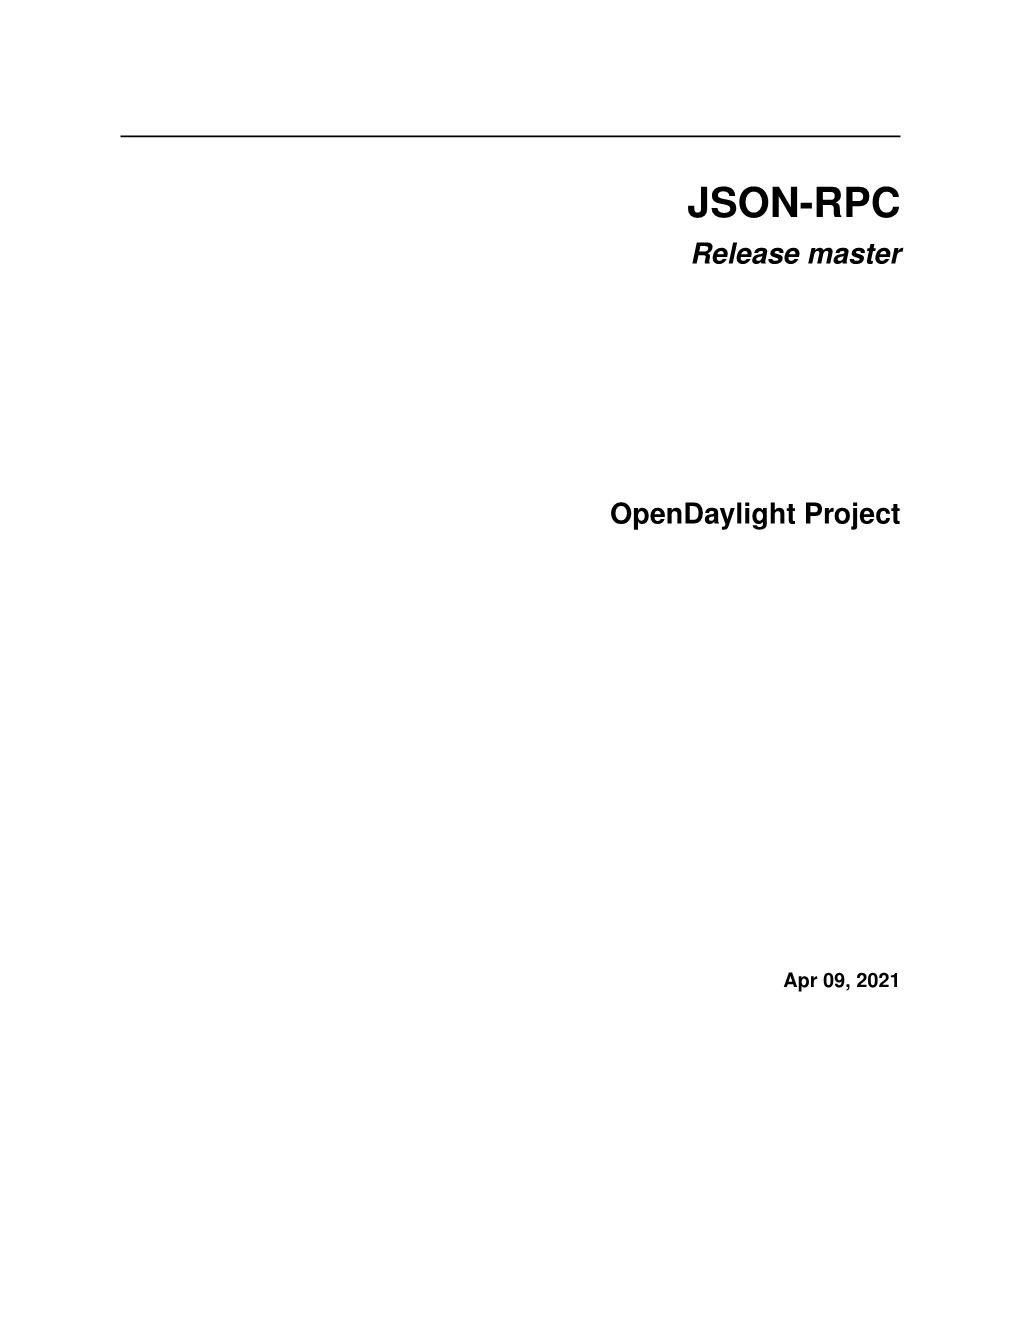 JSON-RPC Release Master